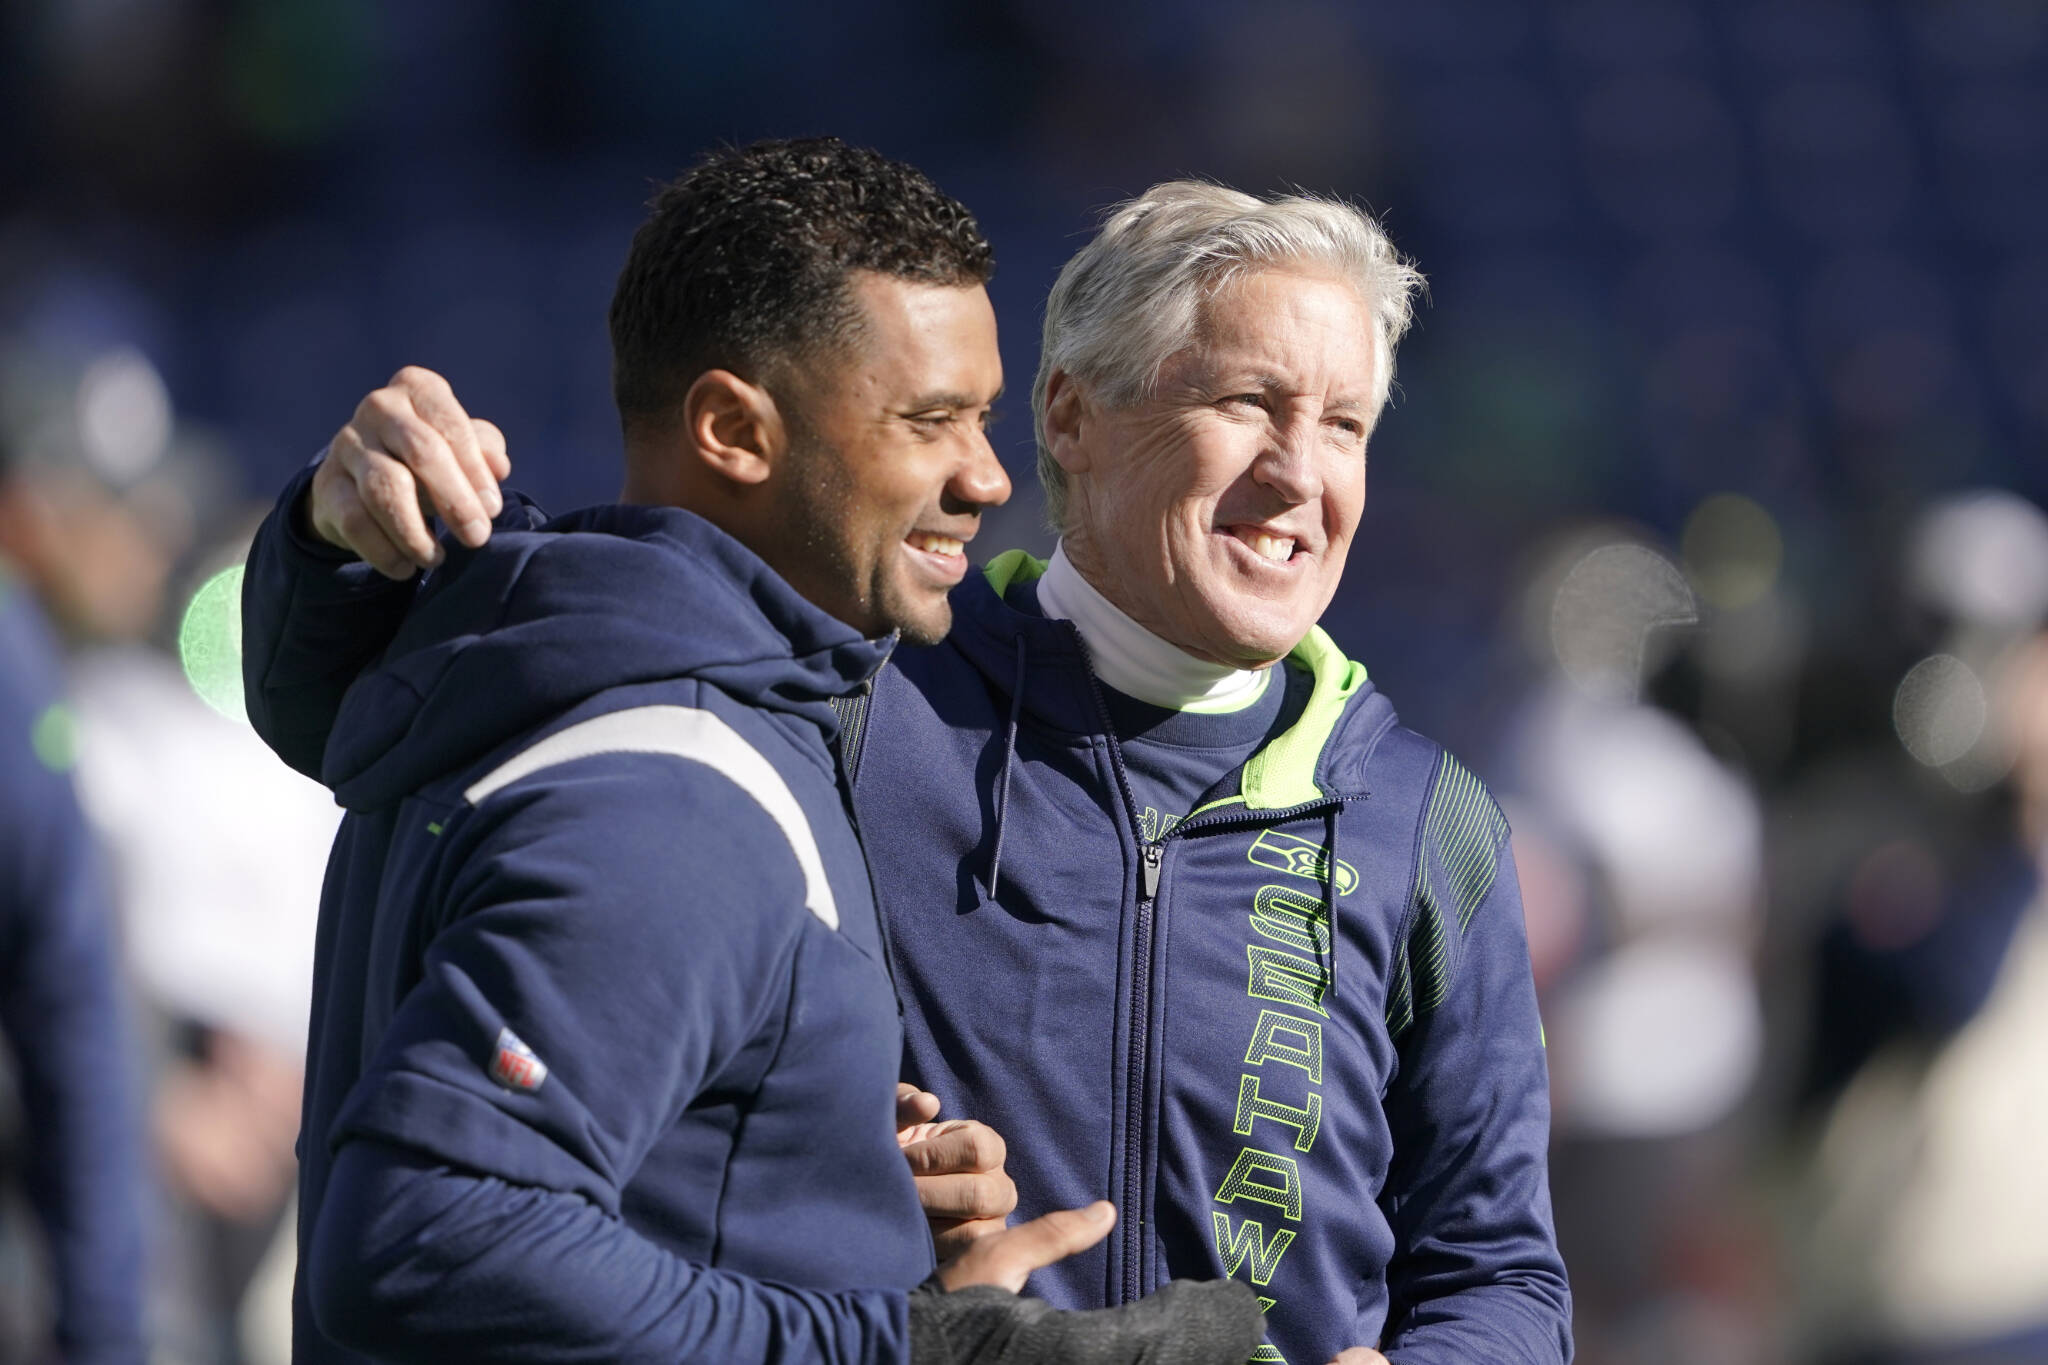 Seahawks head coach Pete Carroll (right) throws his arm around injured quarterback Russell Wilson as they walk on the field before a game against the Jaguars Oct. 31, 2021, in Seattle. (AP Photo/Ted S. Warren)